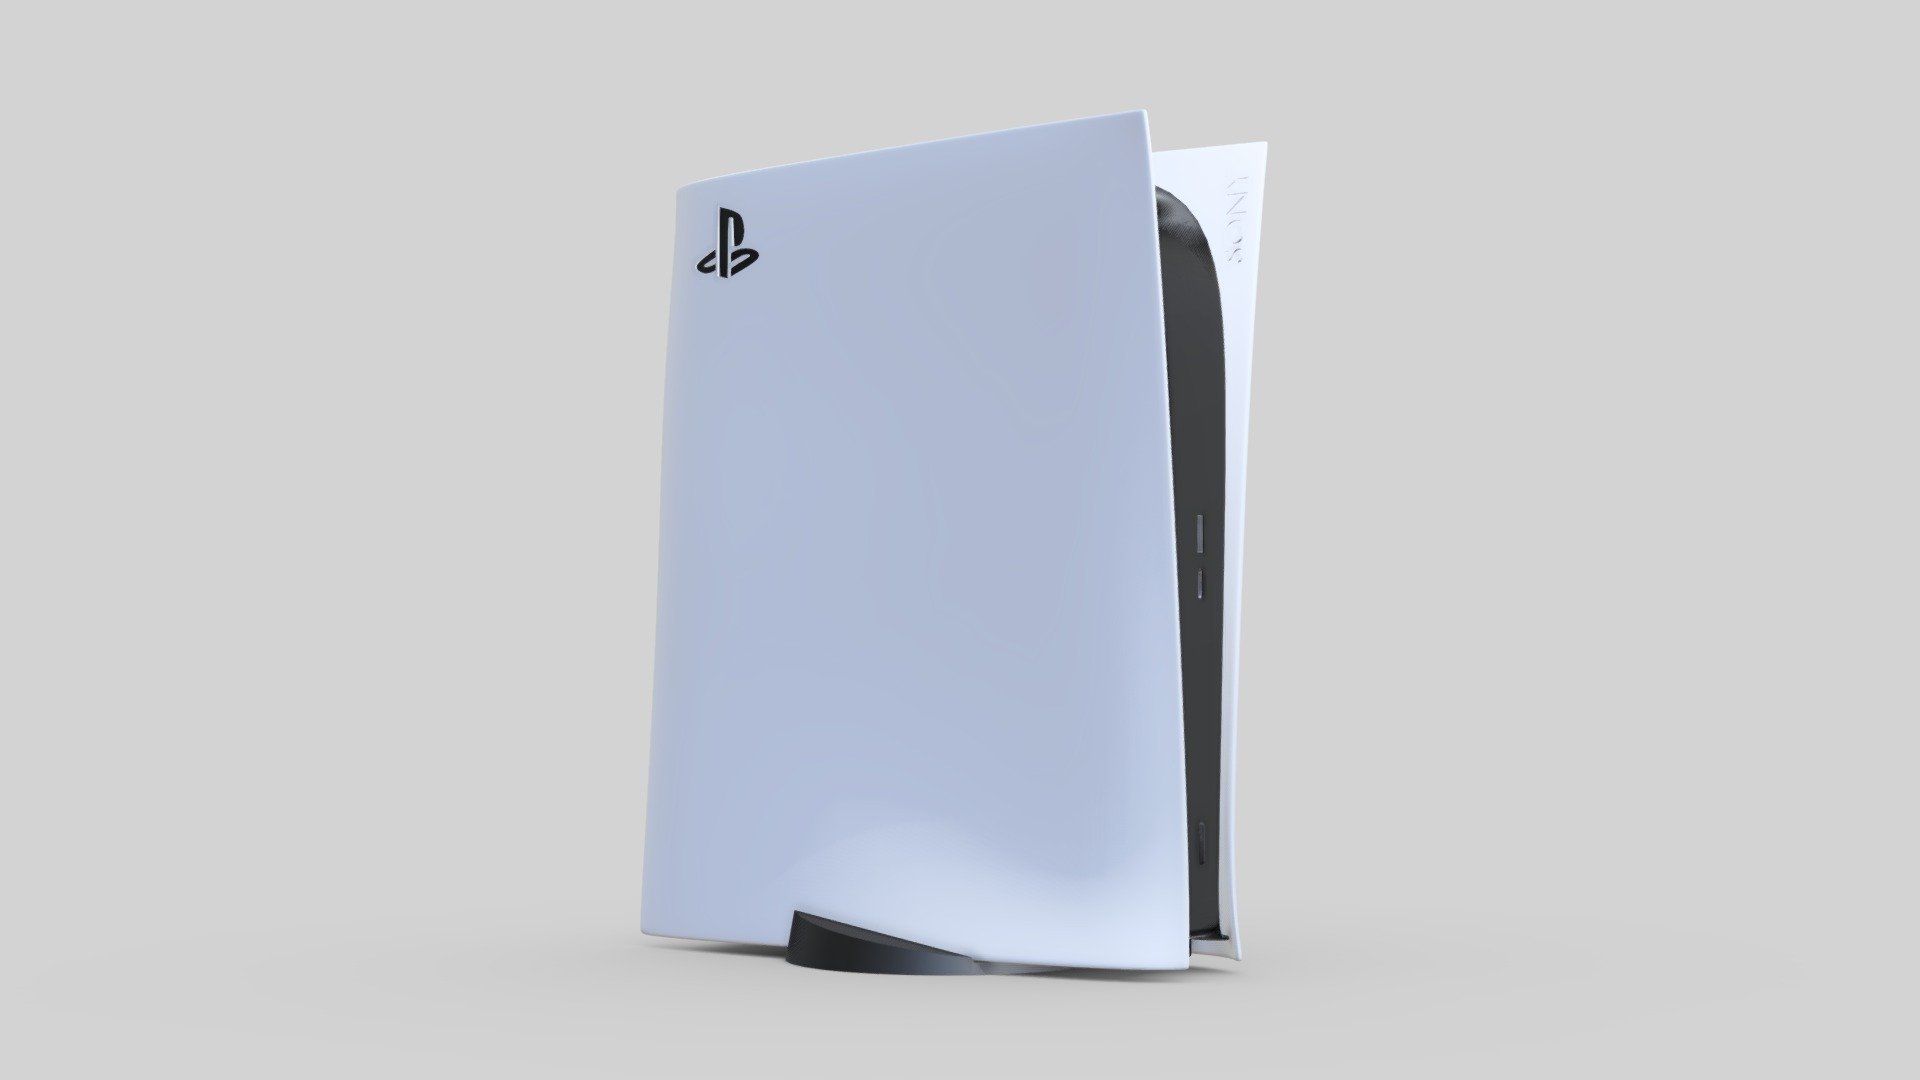 Playstation 5 Digital Edition

New console 2020, PS5 Digital Edition. 

All materials and parts are named and parented.

File formats: 





.dae




.fbx




.obj




gtLF 2.0 (.glb)



Comment if you have any issue, like if you like it, and follow if you want more free models! - Playstation 5 Digital Edition - Download Free 3D model by DatSketch 3d model